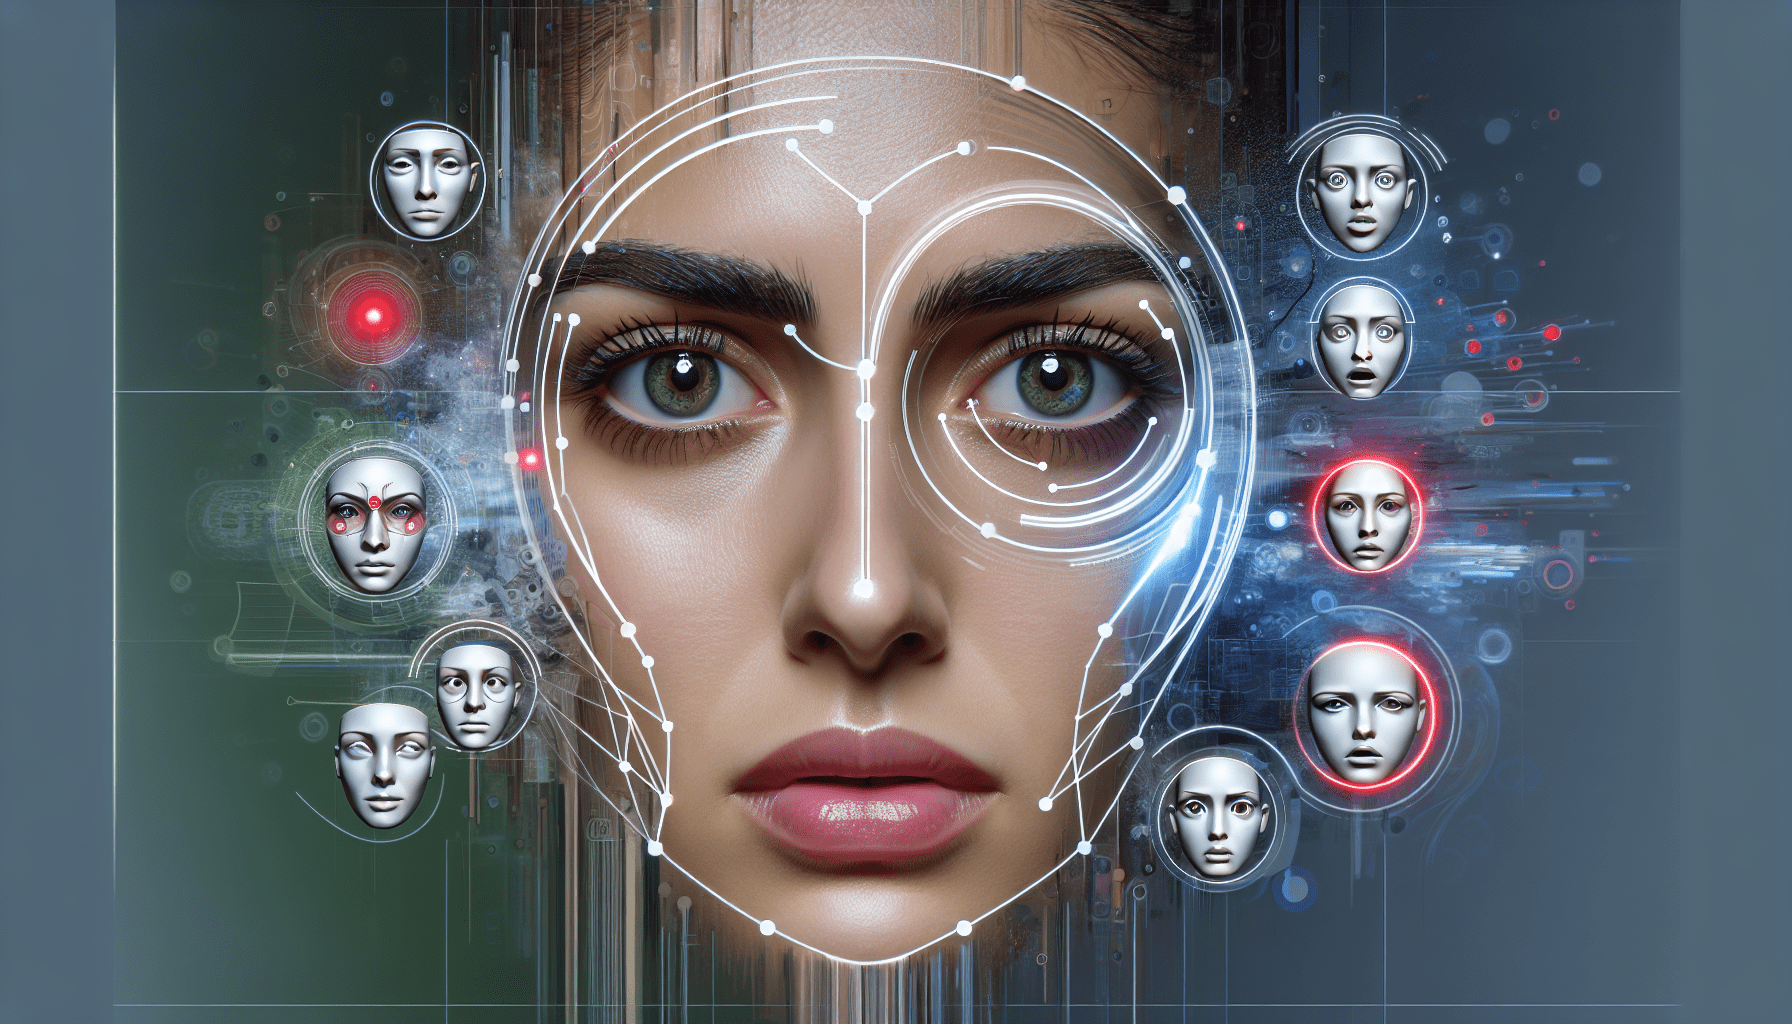 Facial Expression Analysis For Emotionally Intelligent Virtual Assistants